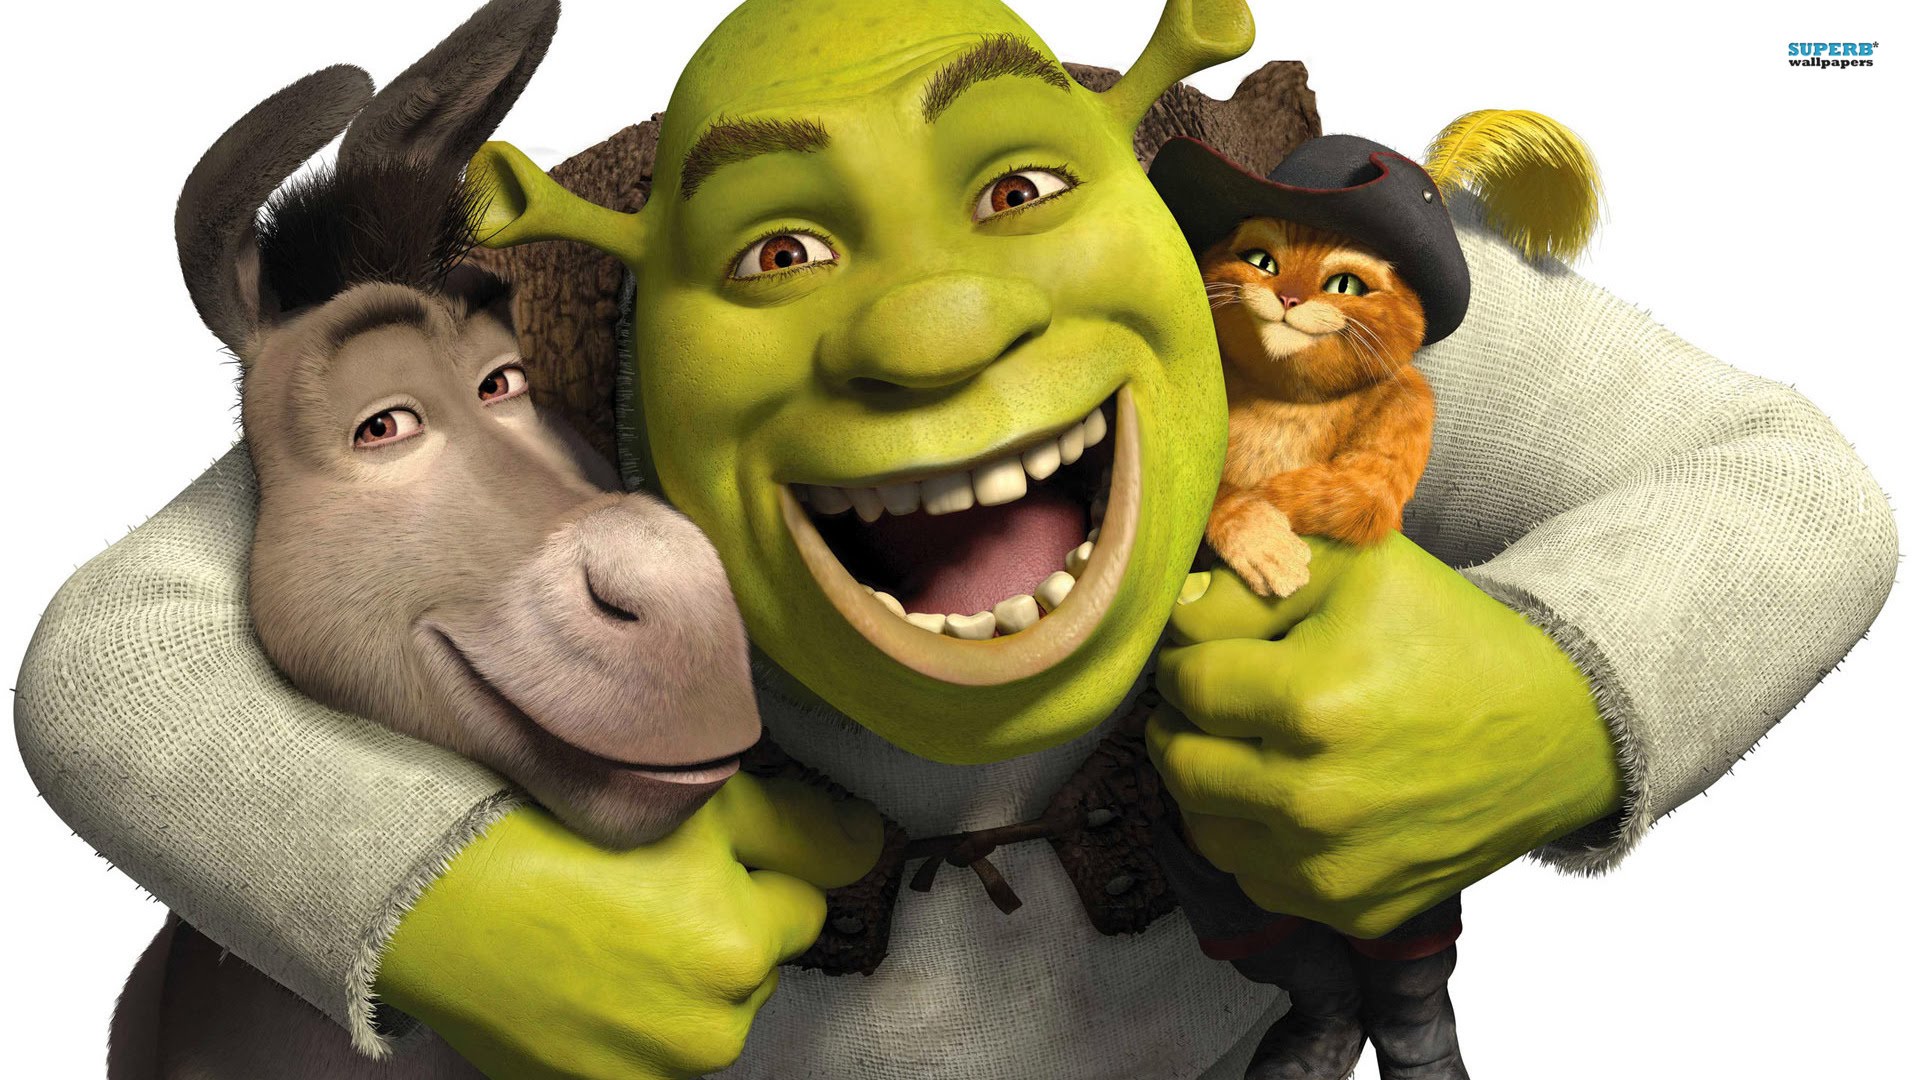 Shrek Turns 15 With A Box Set And Brand New Extra Features On Dvd